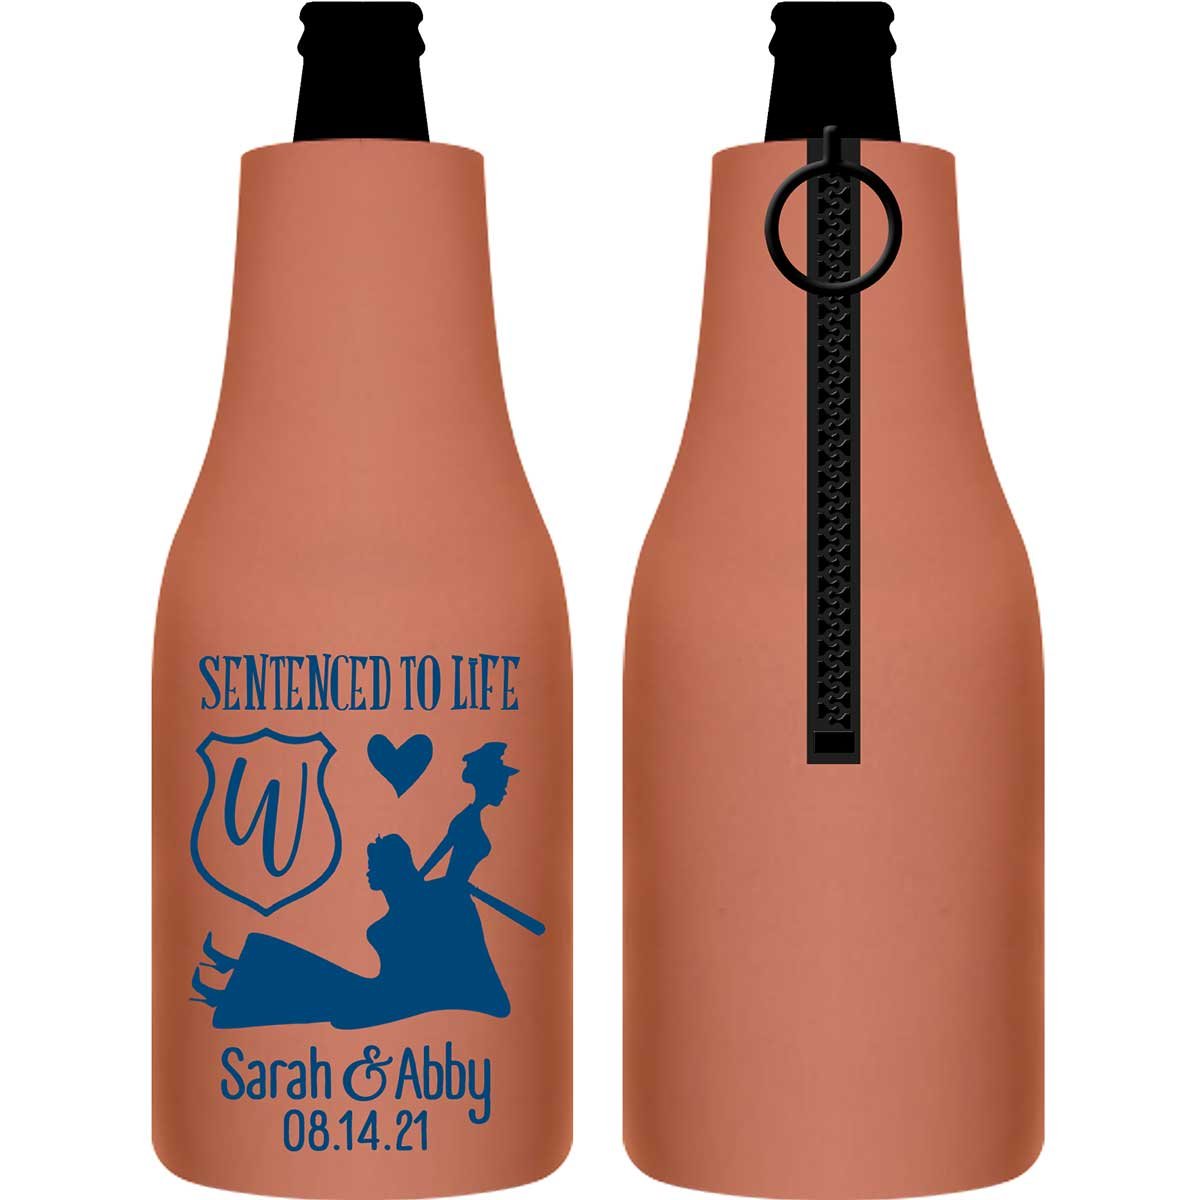 Sentenced To Life 2A Lesbian Policewoman Wedding Foldable Zippered Bottle Koozies Wedding Gifts for Guests